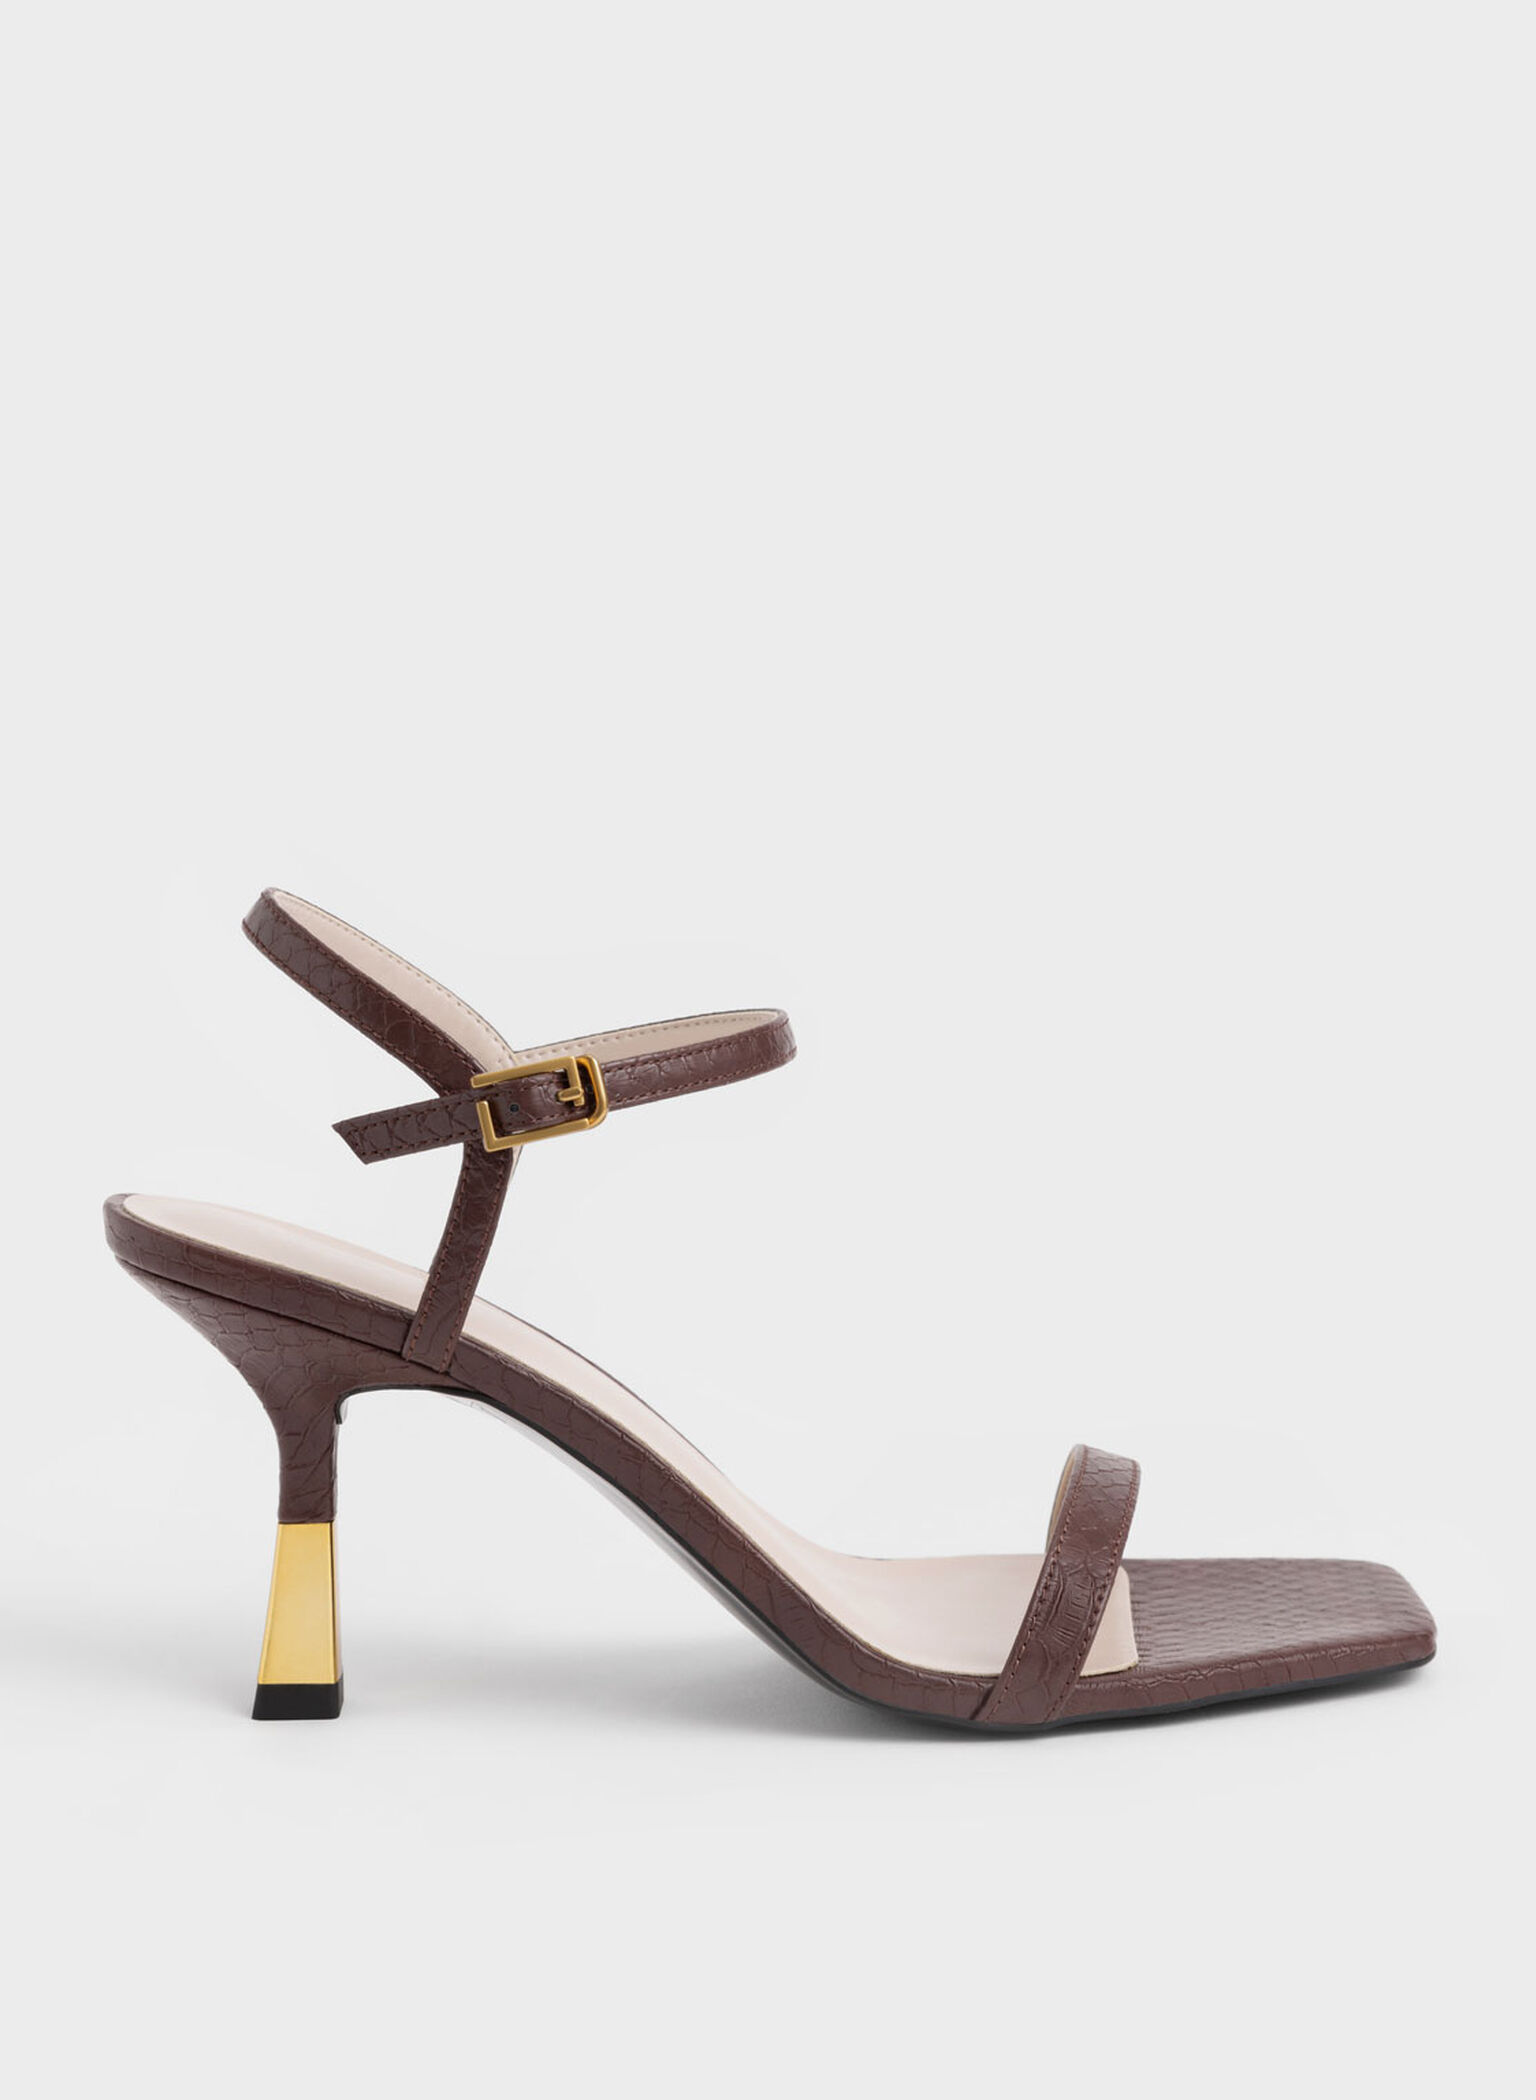 Brown Snake-Print Ankle-Strap Heeled Sandals - CHARLES & KEITH PH